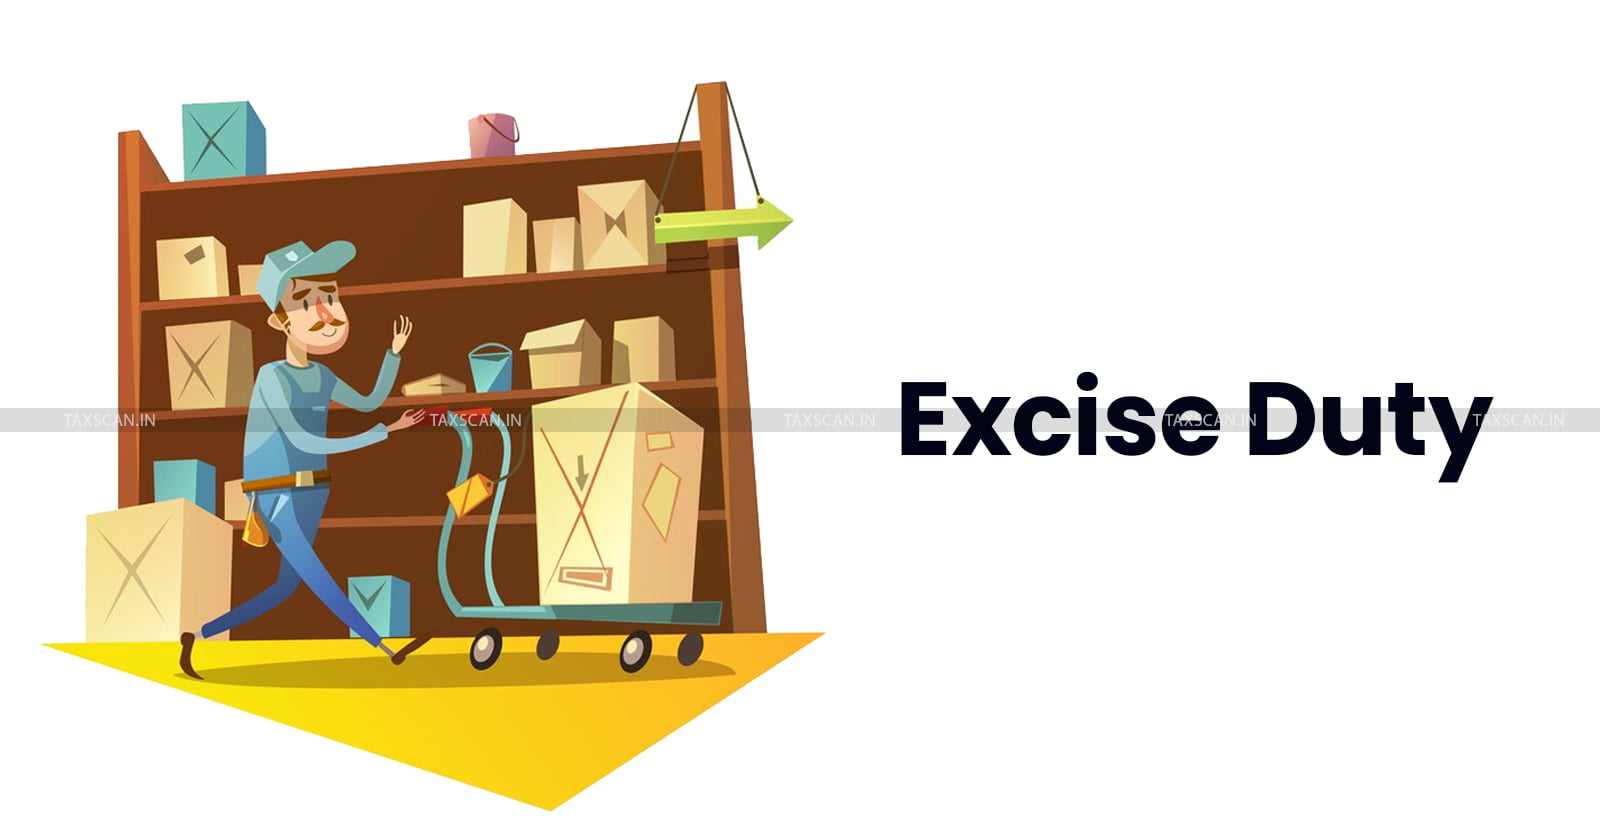 Levy - Excise Duty - Excisable Goods Manufactured - Quantity - values - Central Excise Act - CESTAT - taxscan